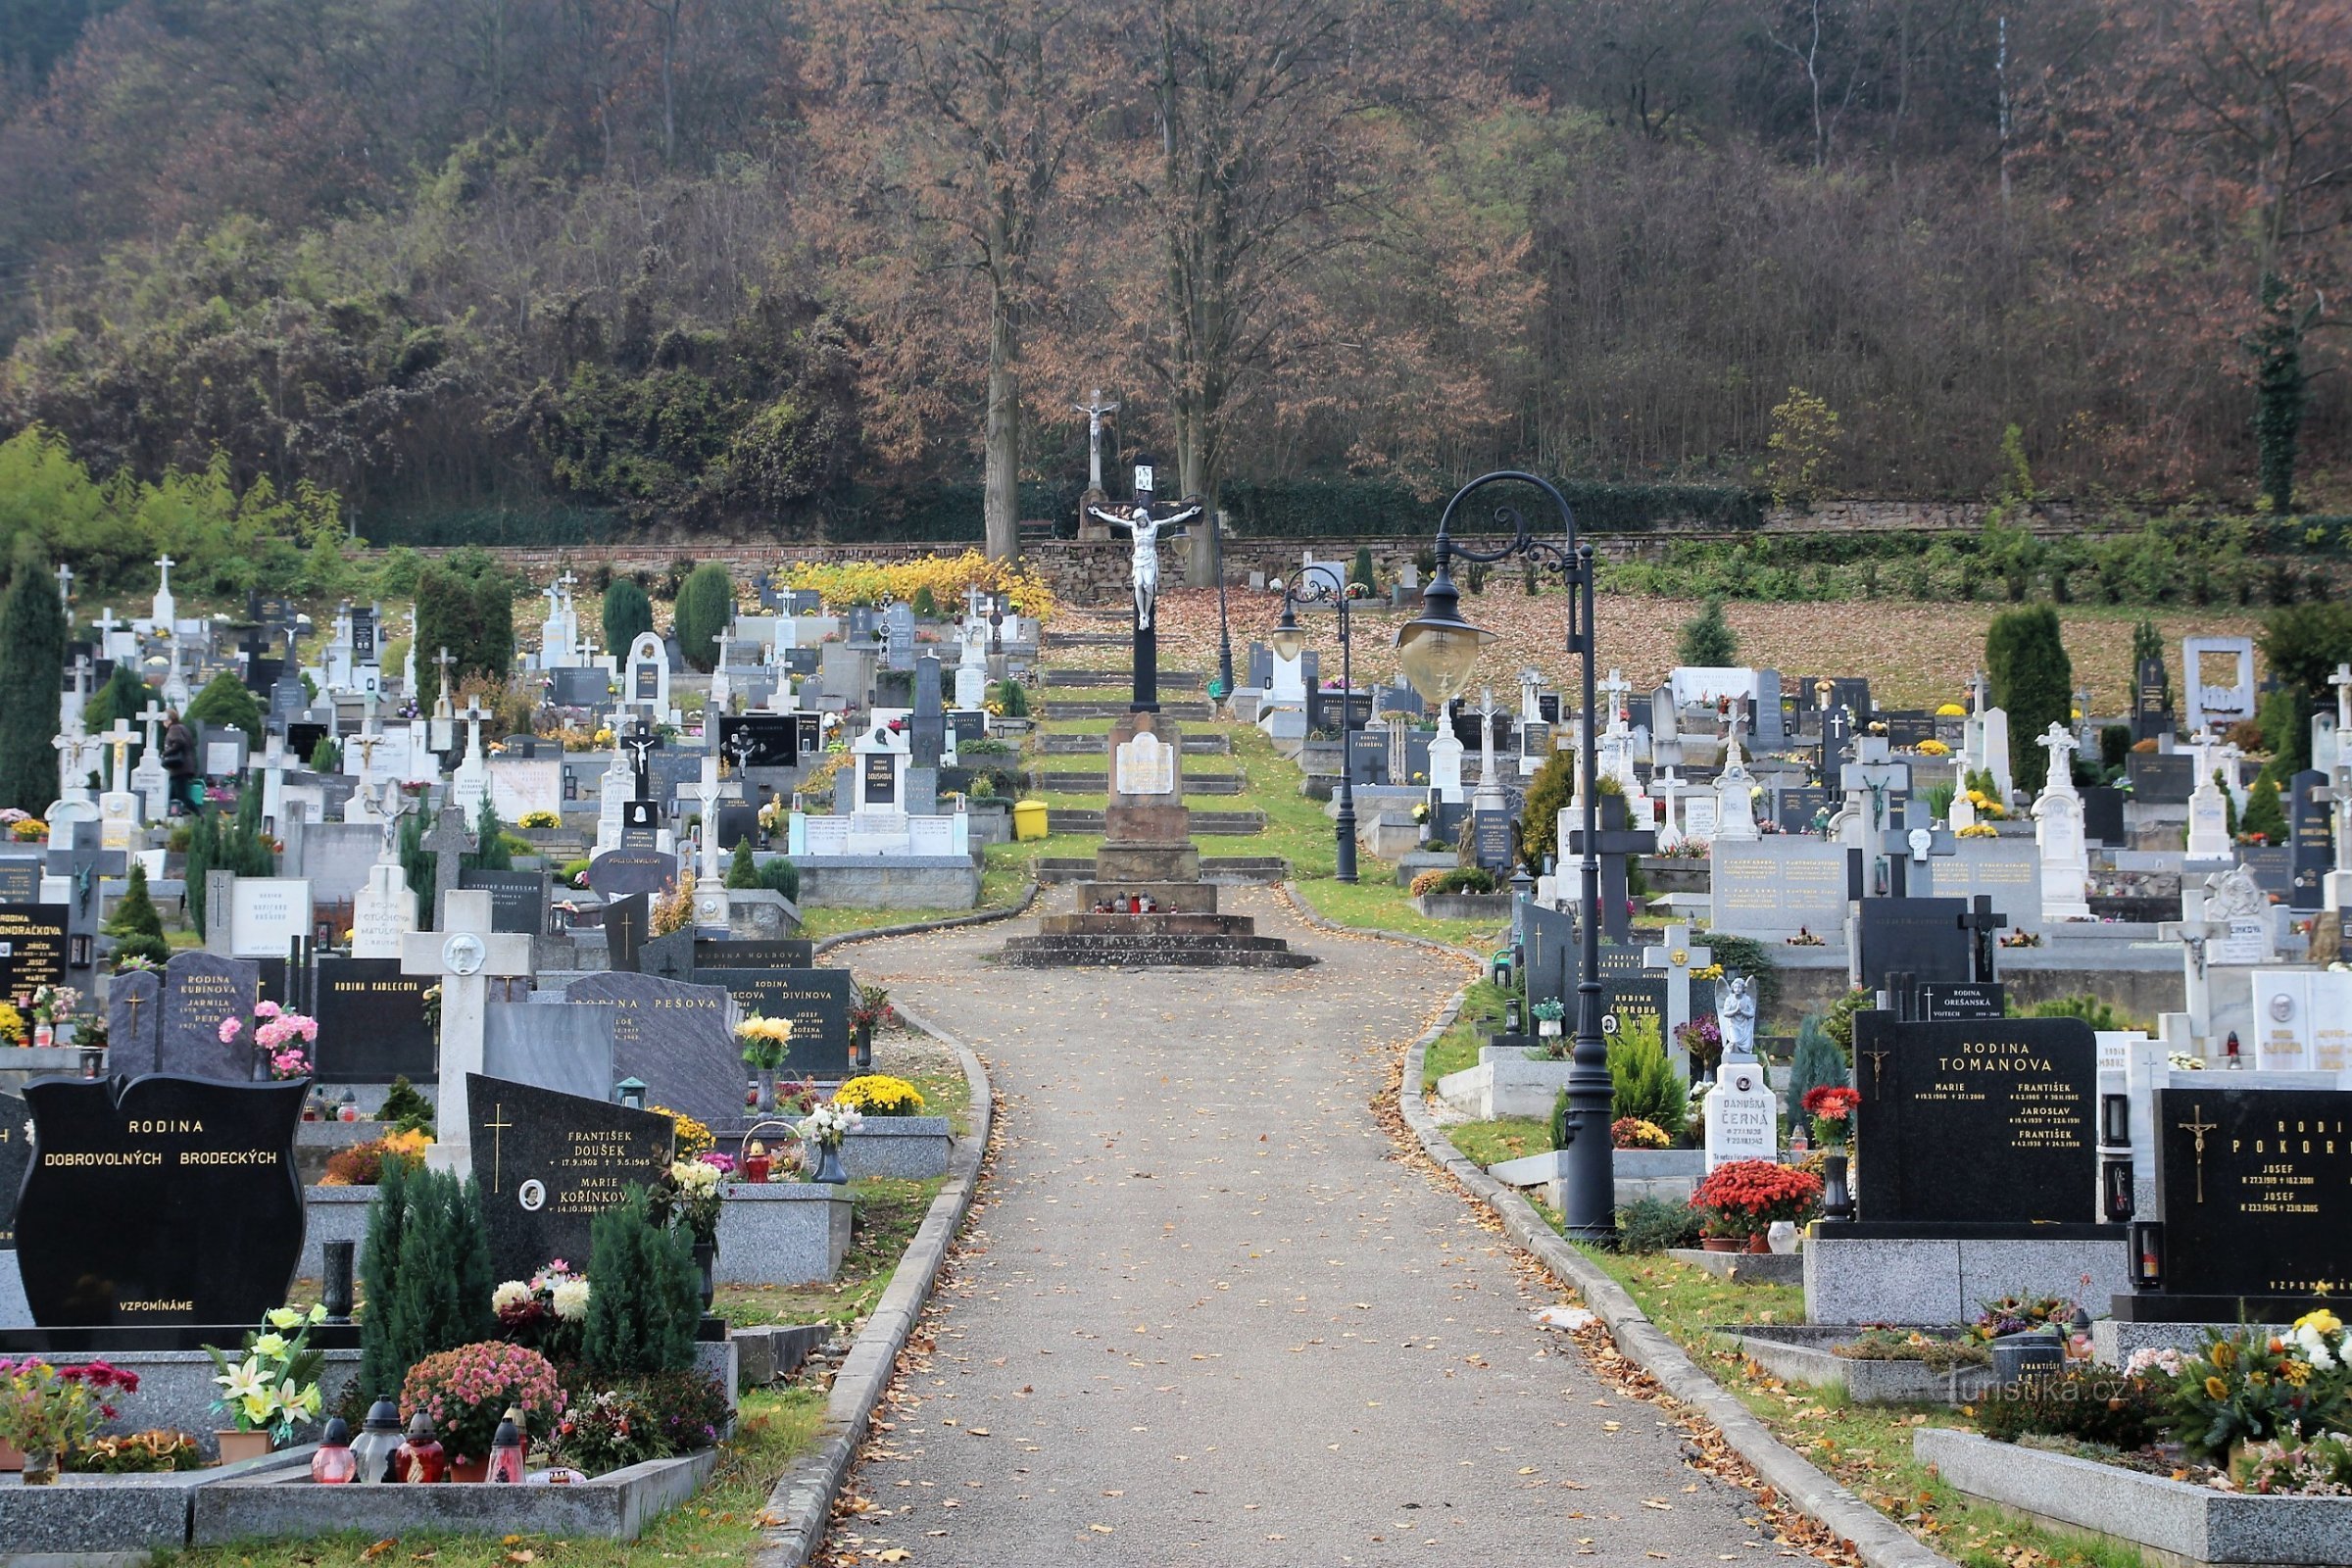 General view of the cemetery